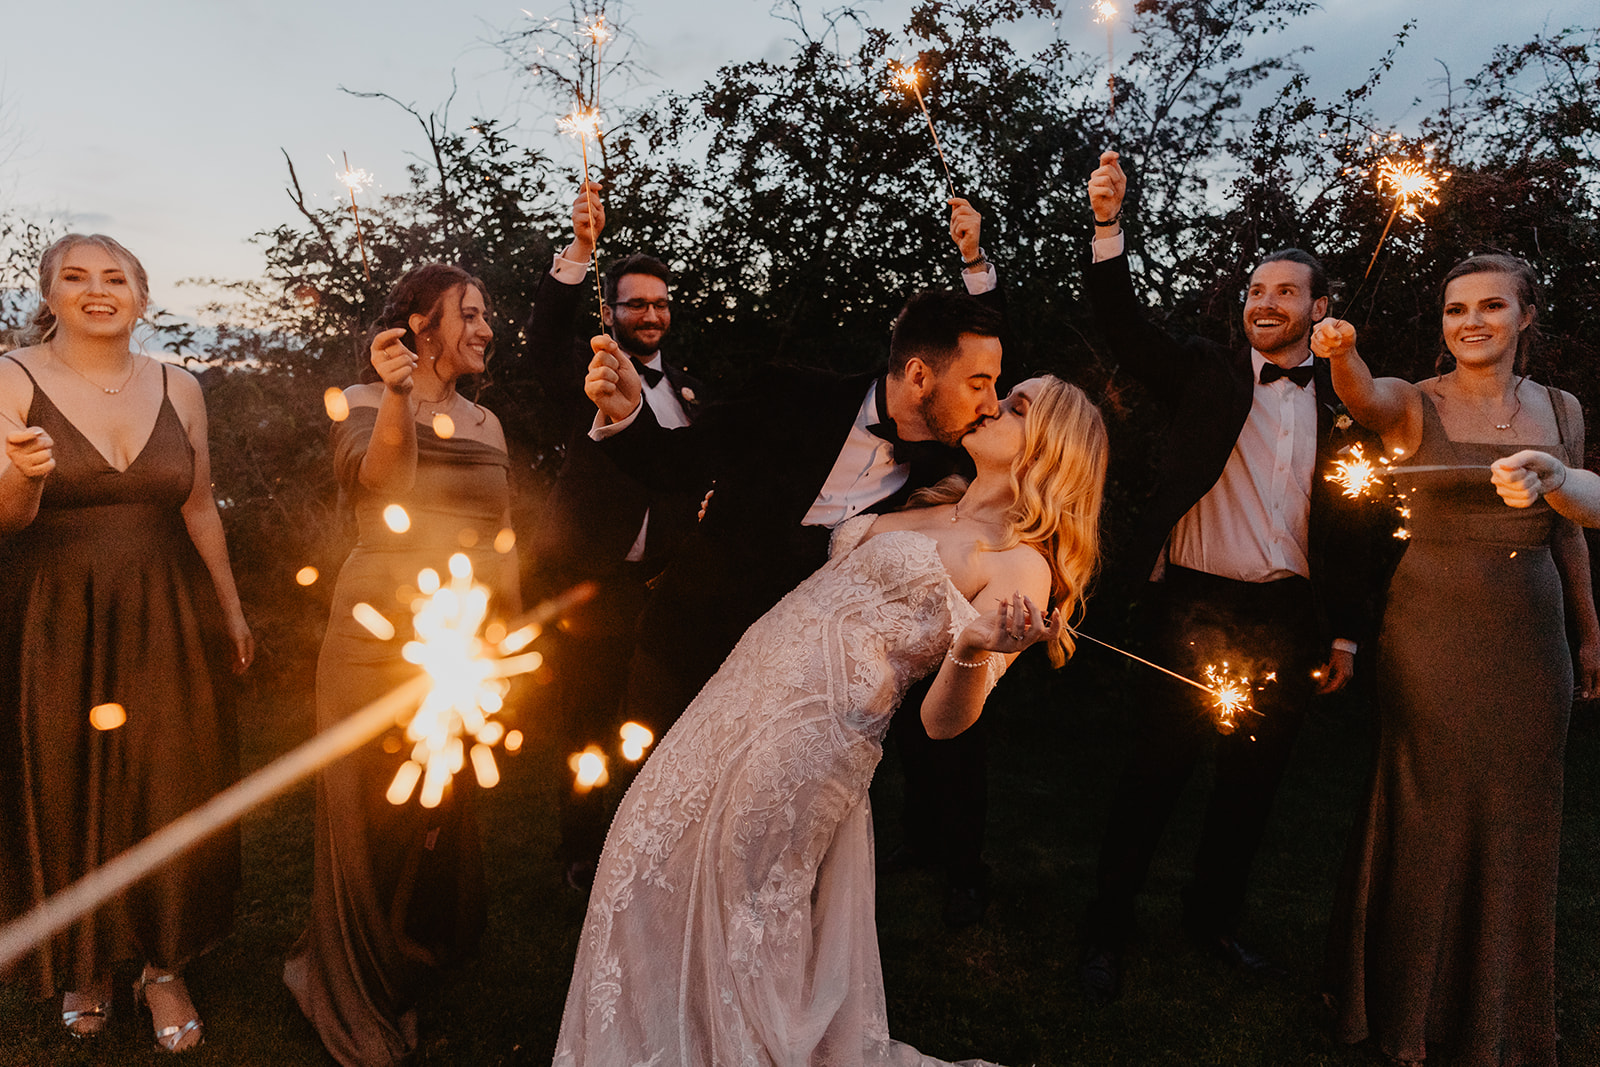 Bride and groom surrounded by sparklers at a Southlands barn wedding, Sussex. Photo by OliveJoy Photography.